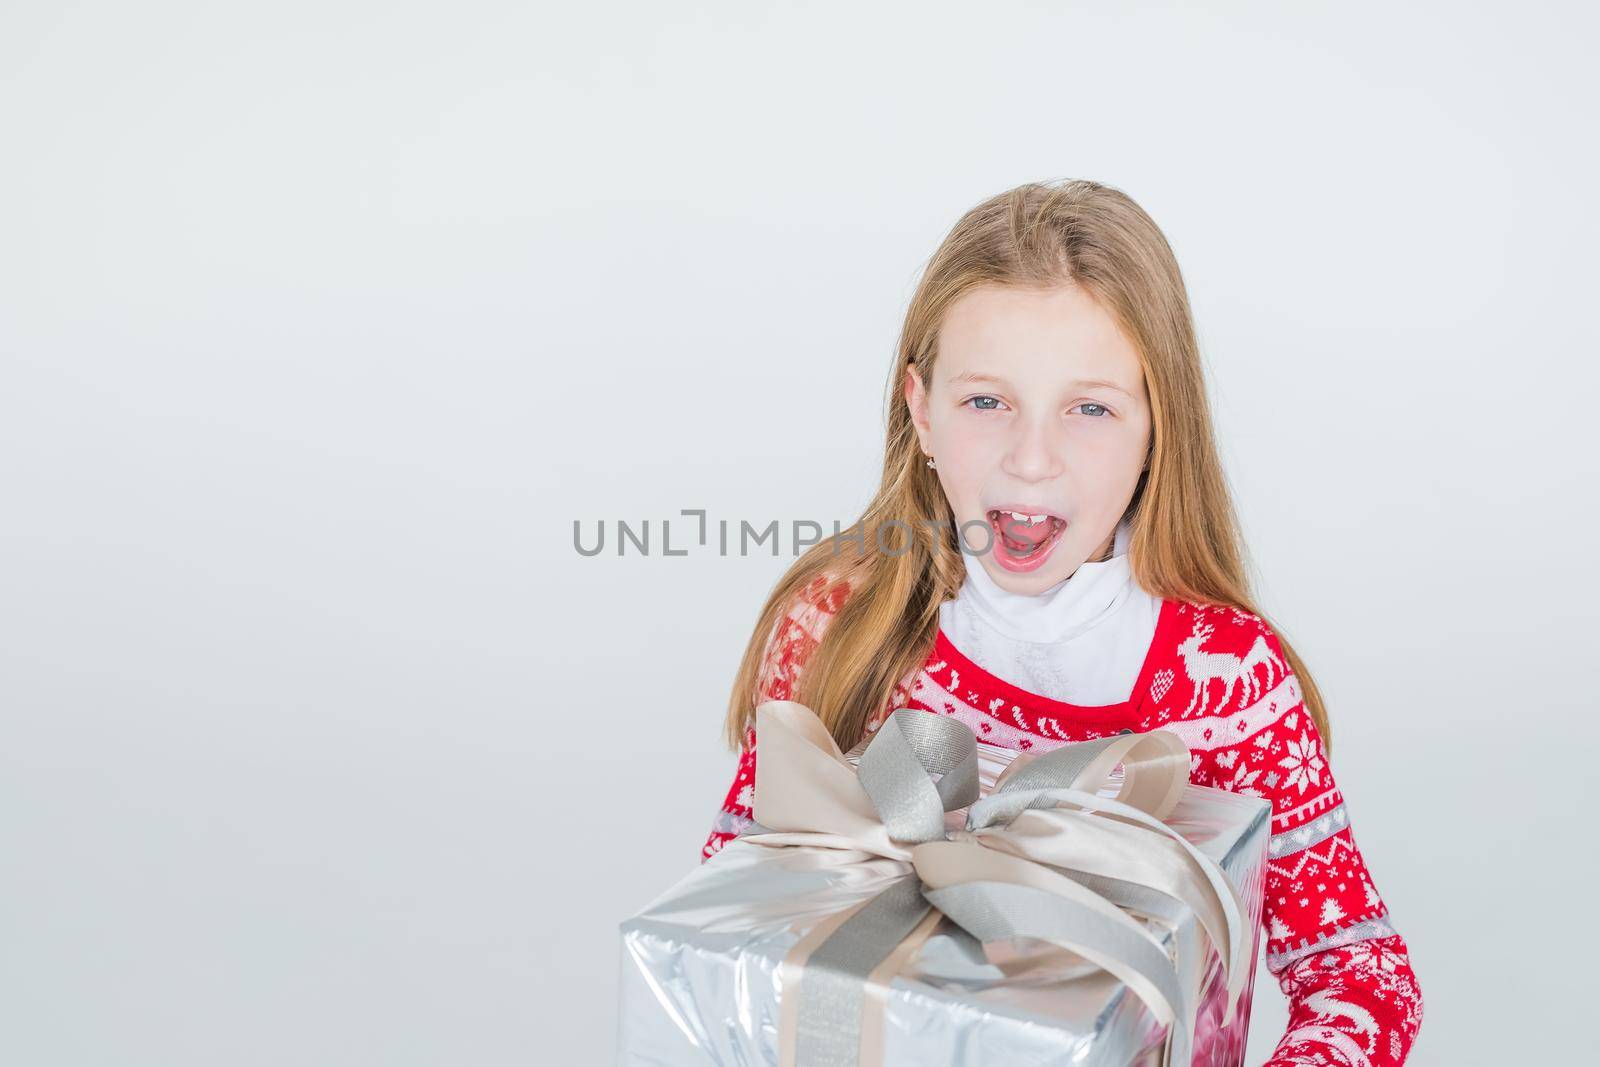 Joyous girl holding gift-wrapped box being excited and surprised to get present on white background.holidays, present, christmas, childhood, happiness concept.Excited surprised young girl in red dress by YuliaYaspe1979